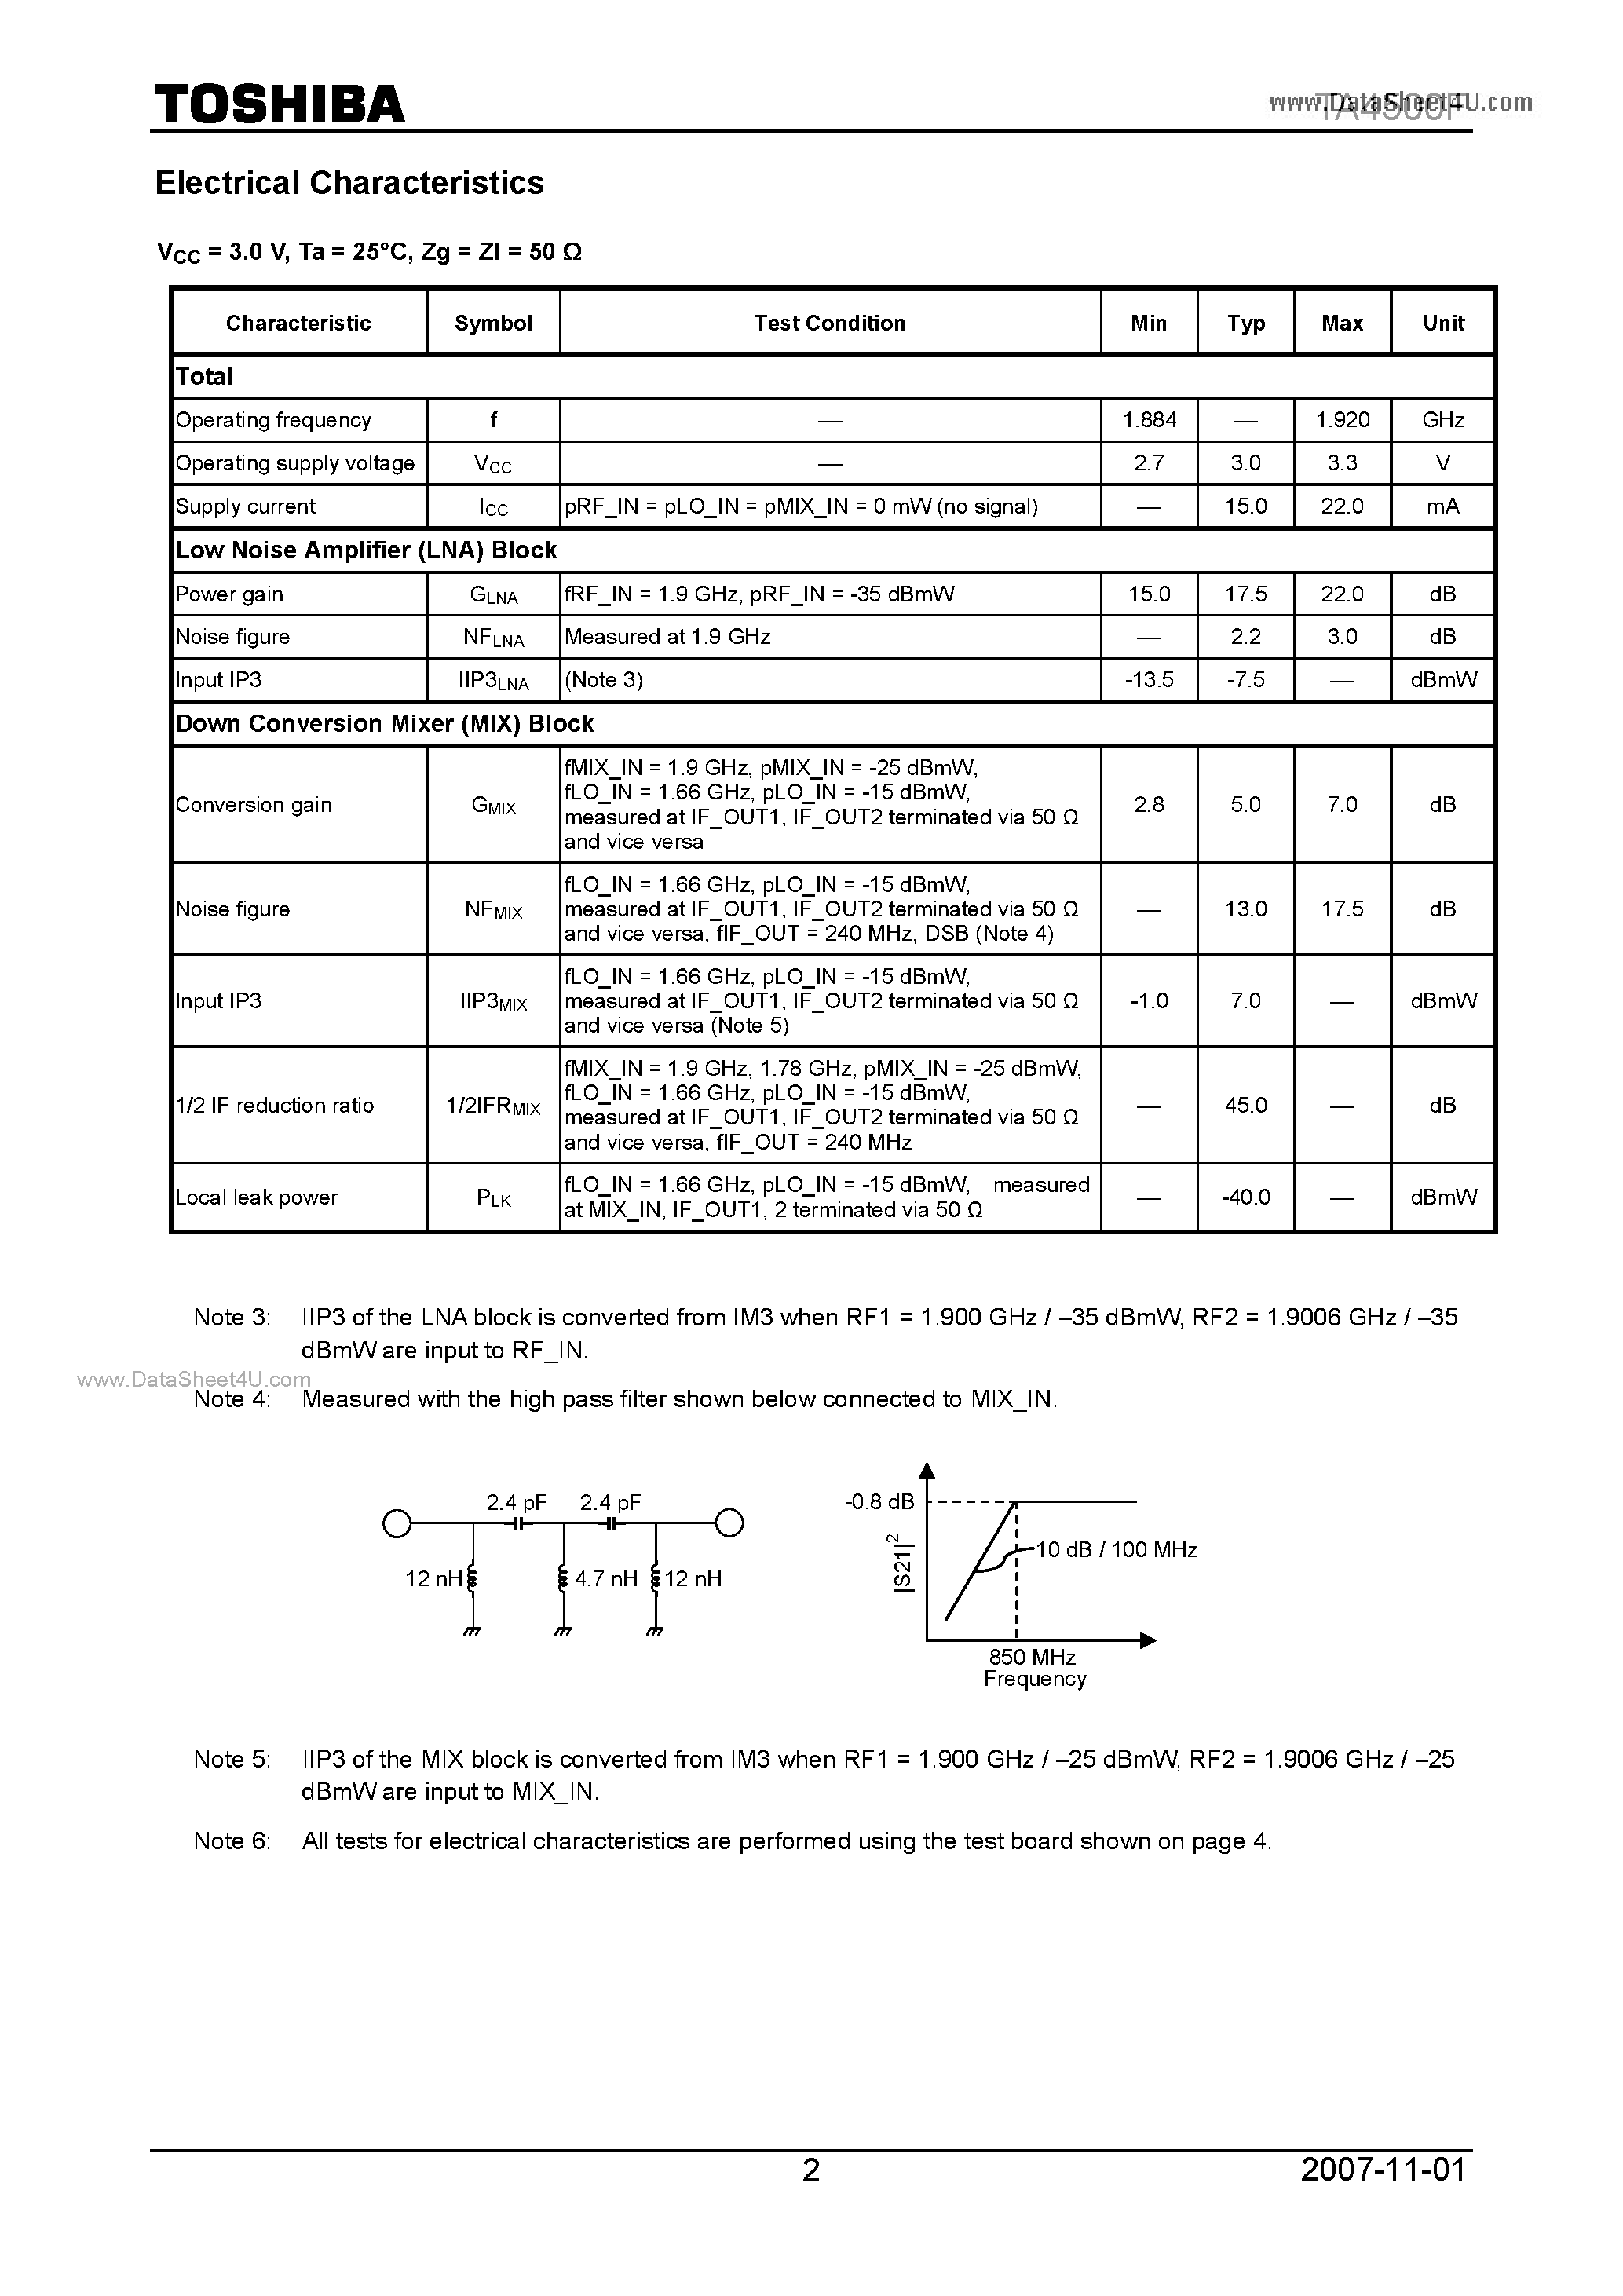 Datasheet TA4500F - 1.9 GHz Band RX Front-End IC page 2